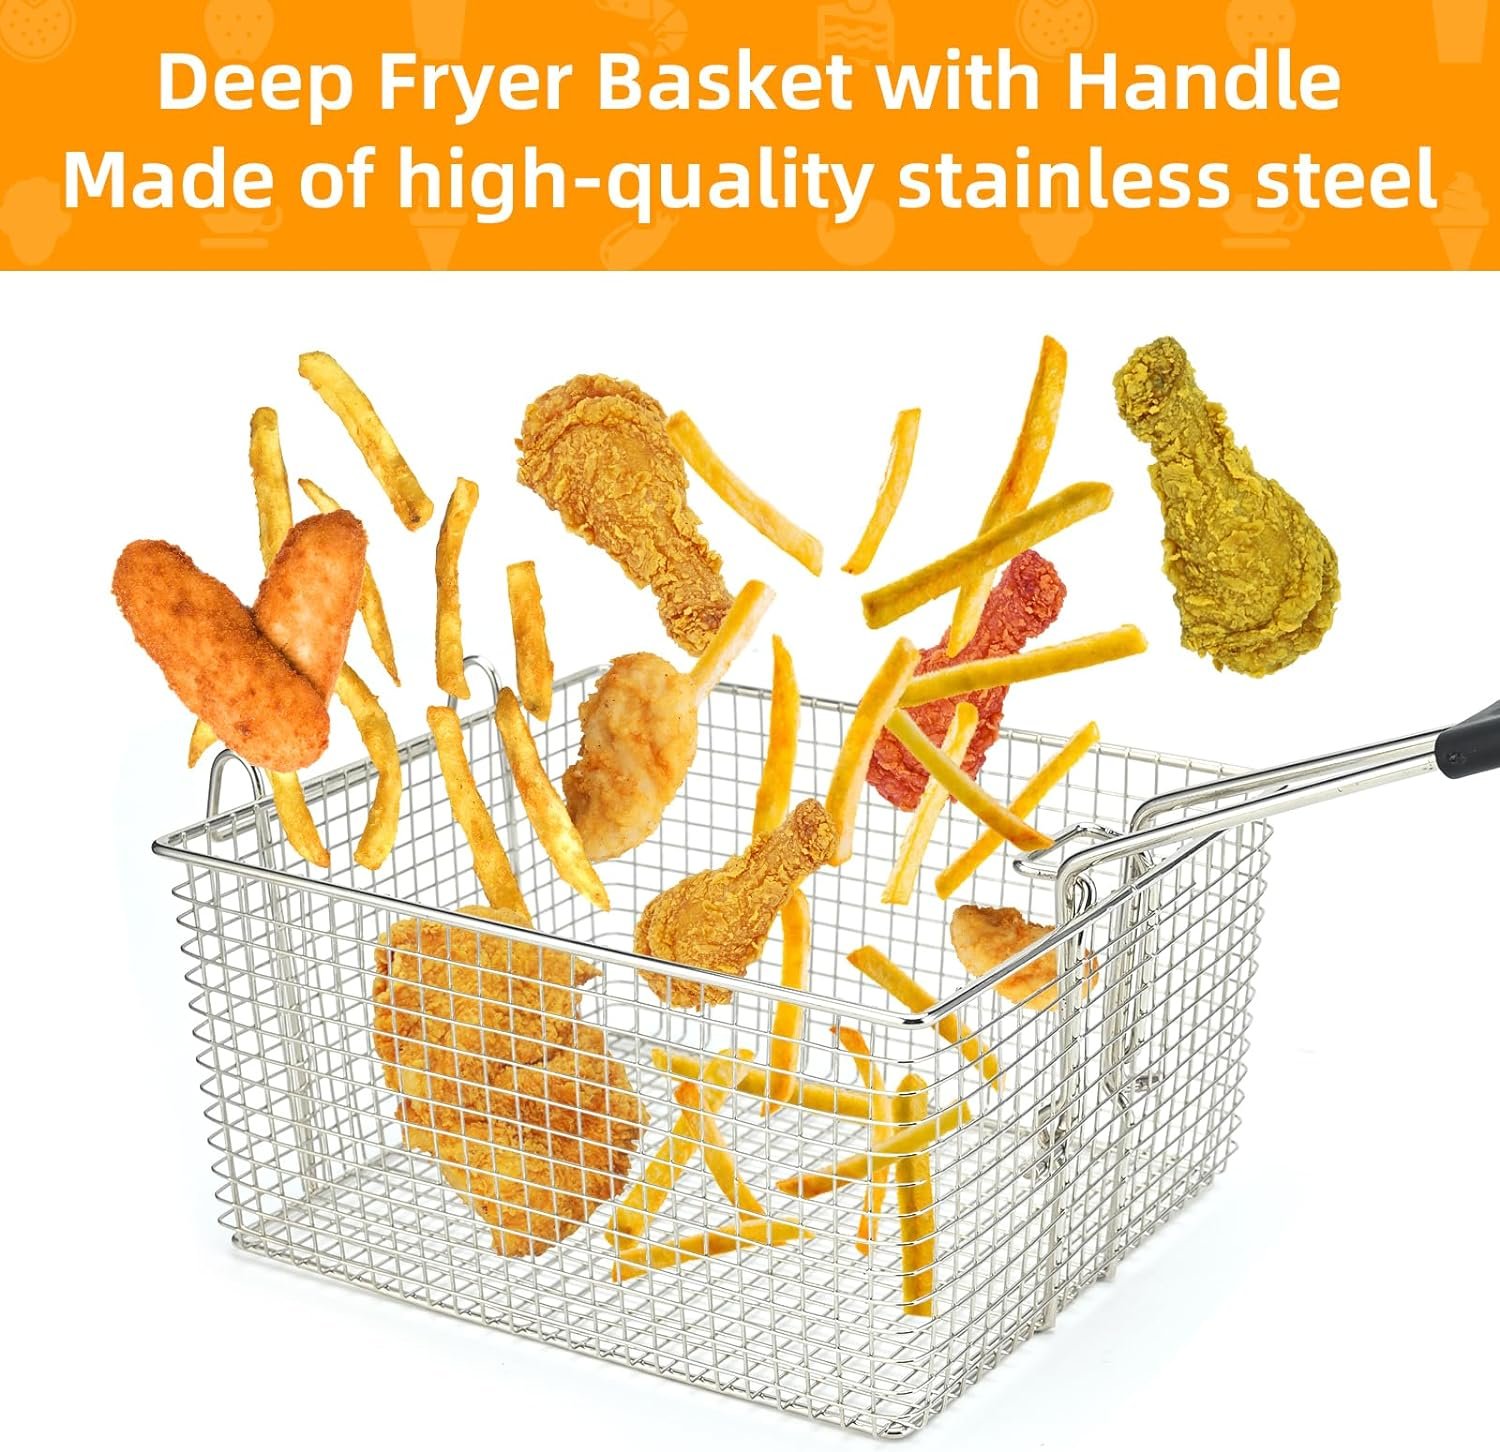 Delizon Electric Fryer Basket for Frying Serving Food, with Rubber Handle Grip, 7.2 x 8.3 x 4.3 Heavy Duty Construction Suitable for fry chicken, fish, french fries